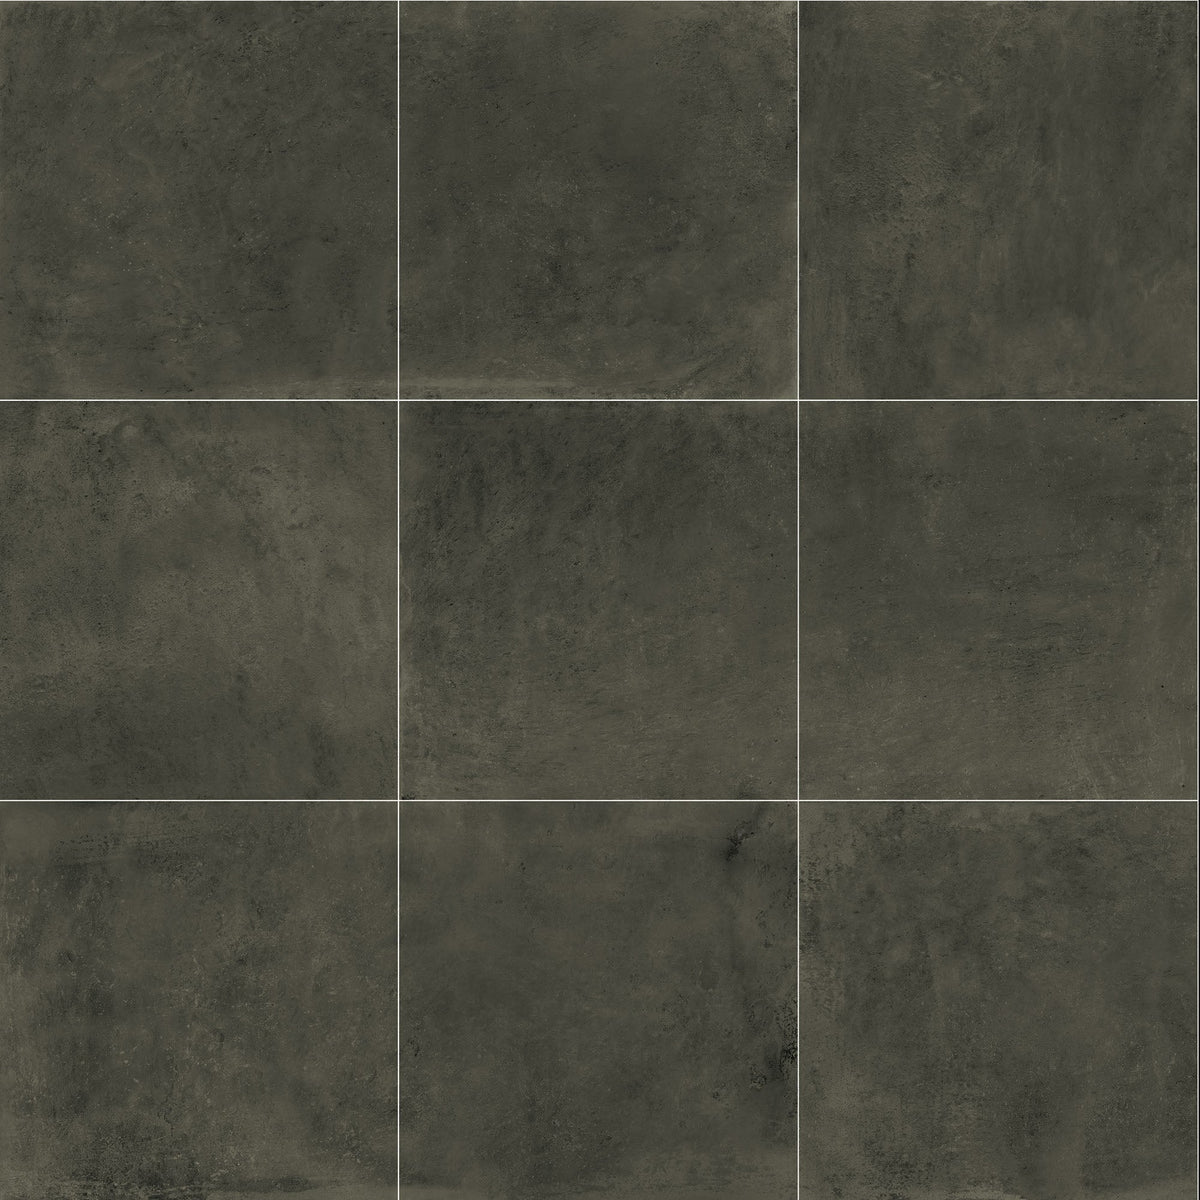 Daltile - Portfolio 24 in. x 24 in. Rectified Porcelain Tile - Charcoal